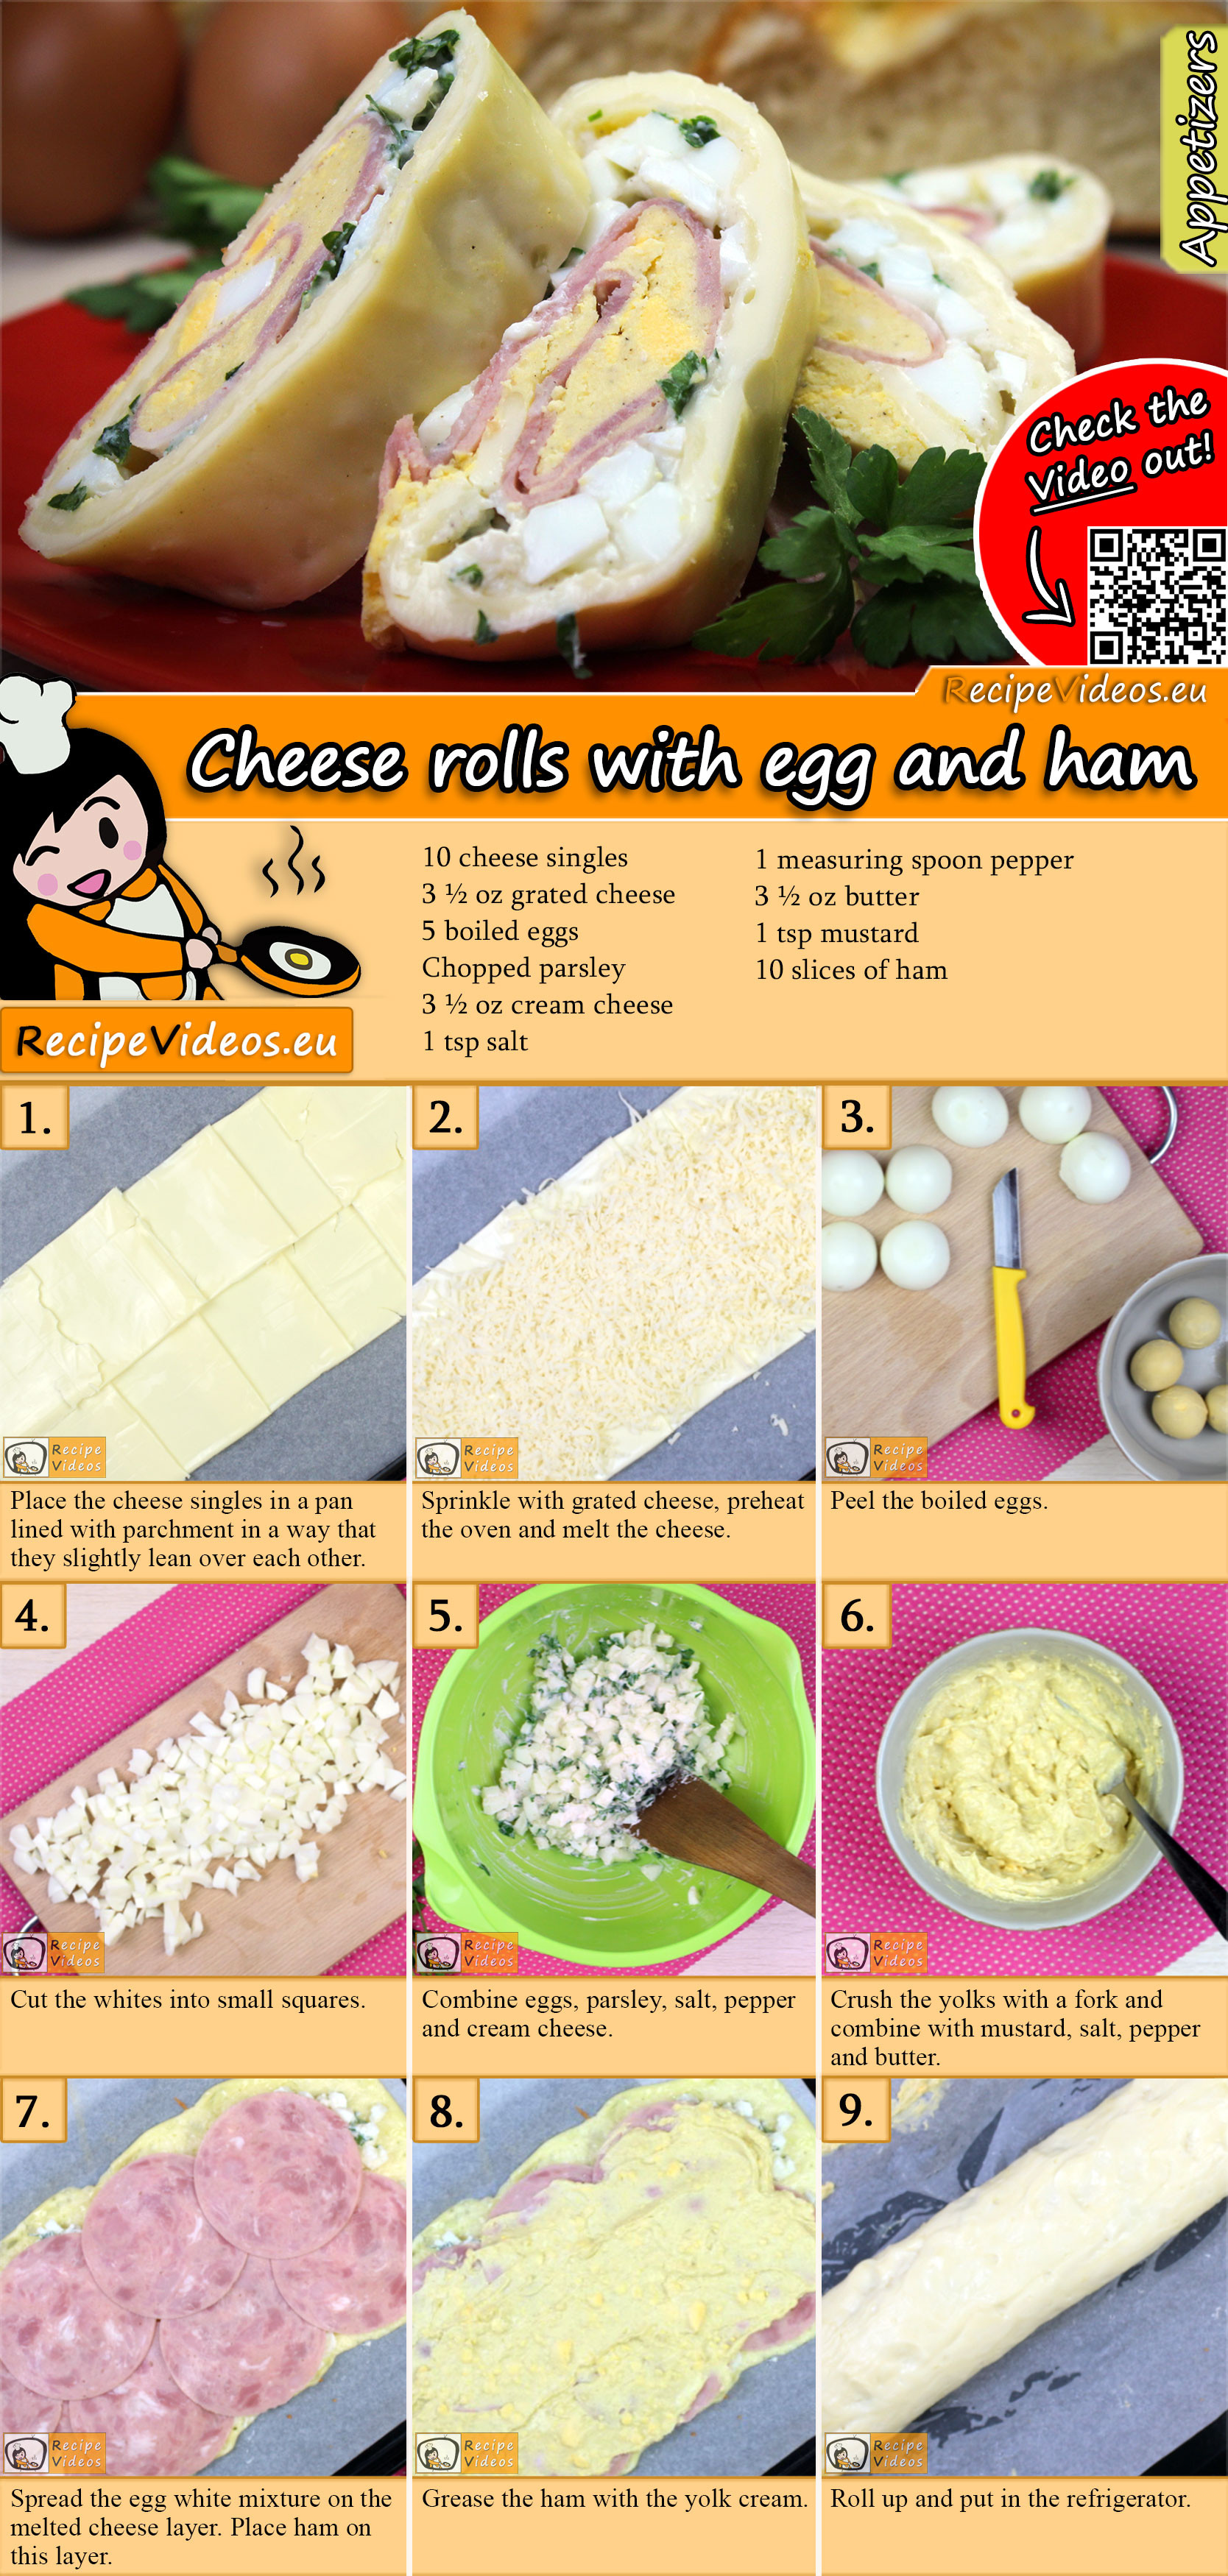 Cheese rolls with egg and ham recipe with video